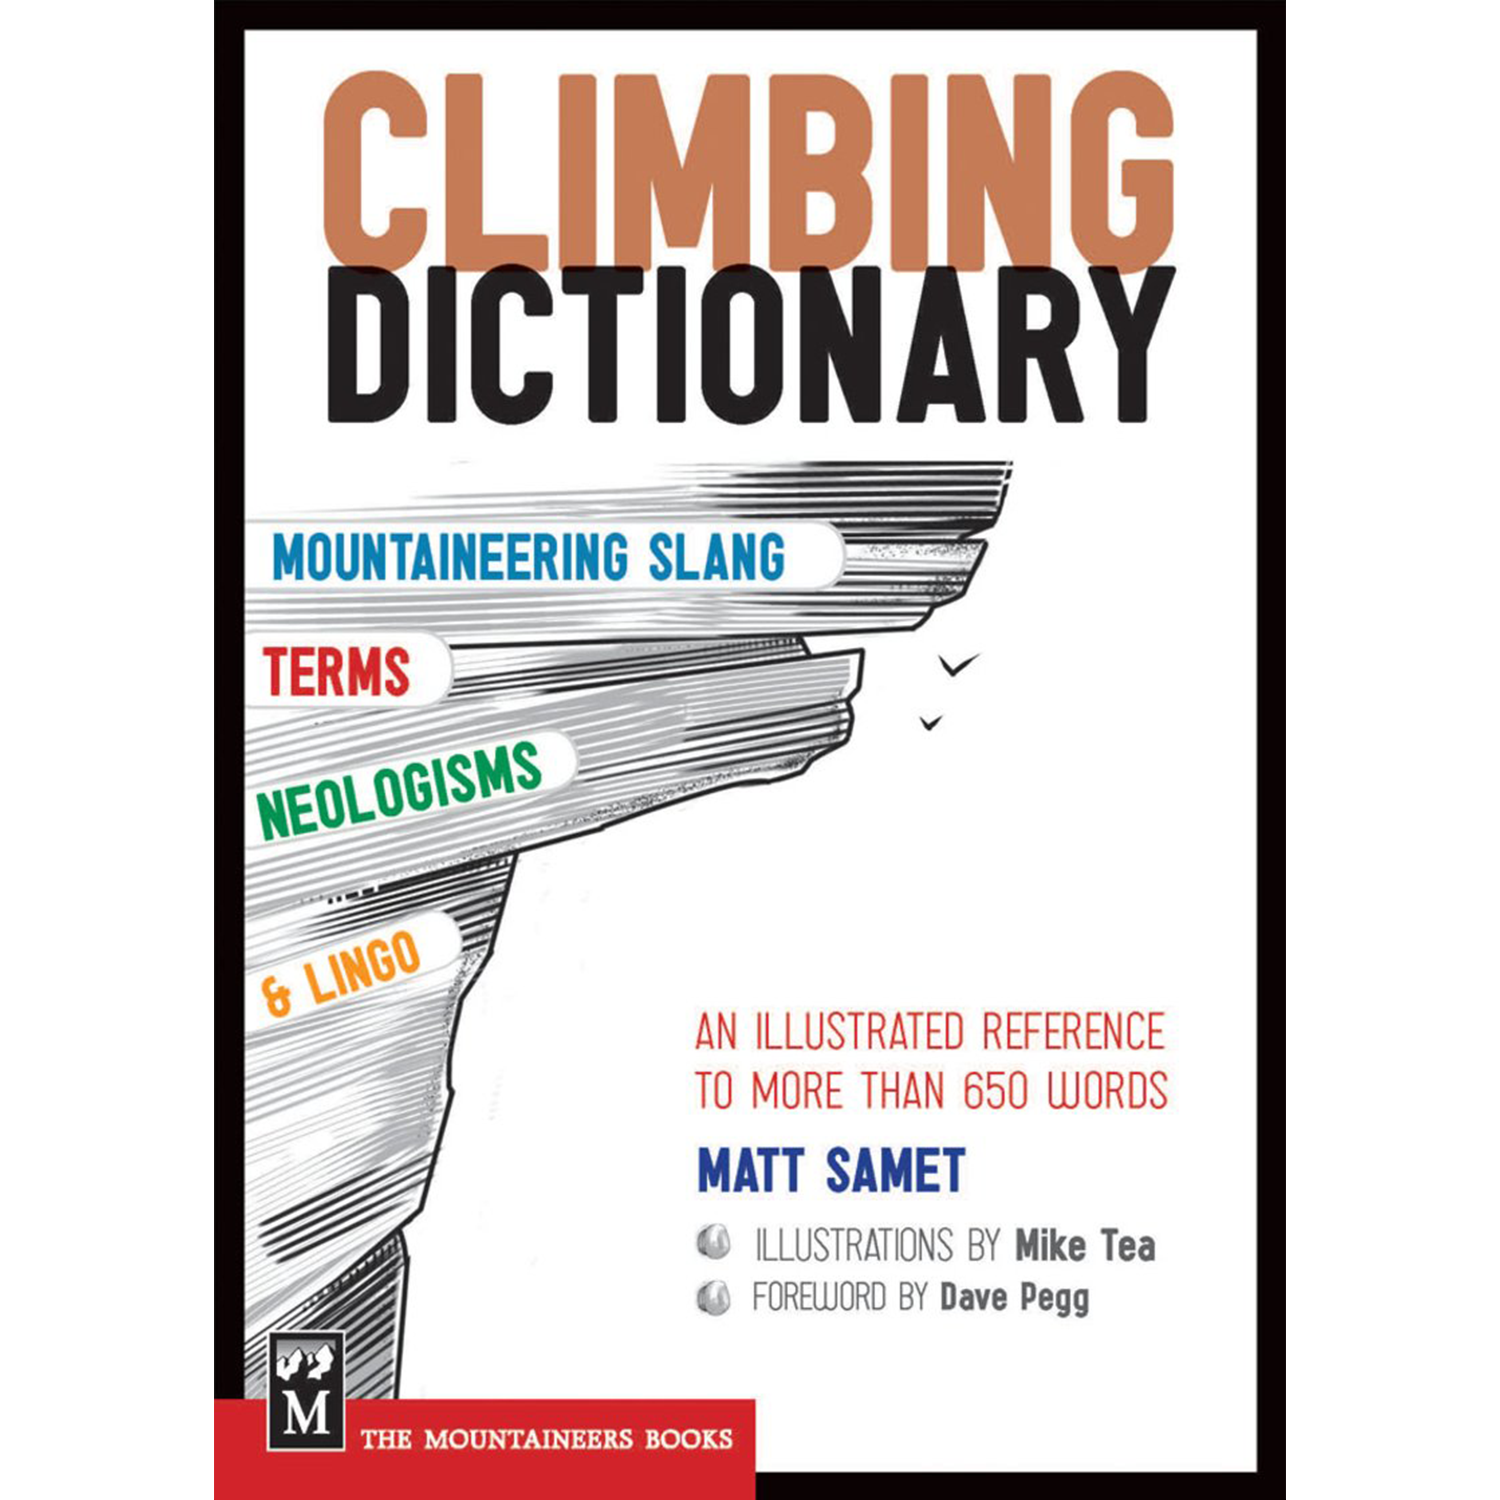 The Climbing Dictionary : Mountaineering Slang, Terms, Neologisms & Ling